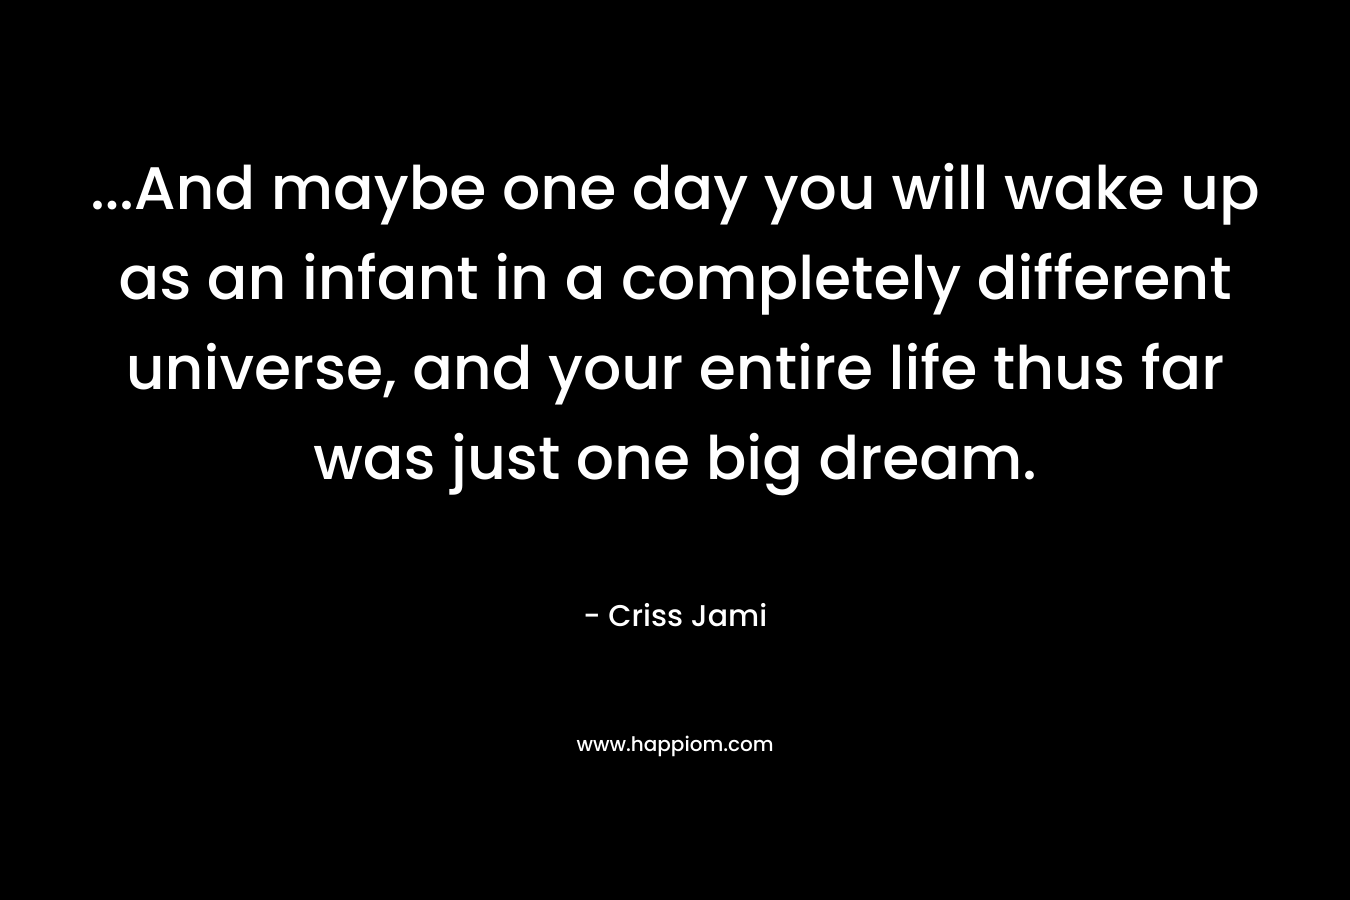 ...And maybe one day you will wake up as an infant in a completely different universe, and your entire life thus far was just one big dream.